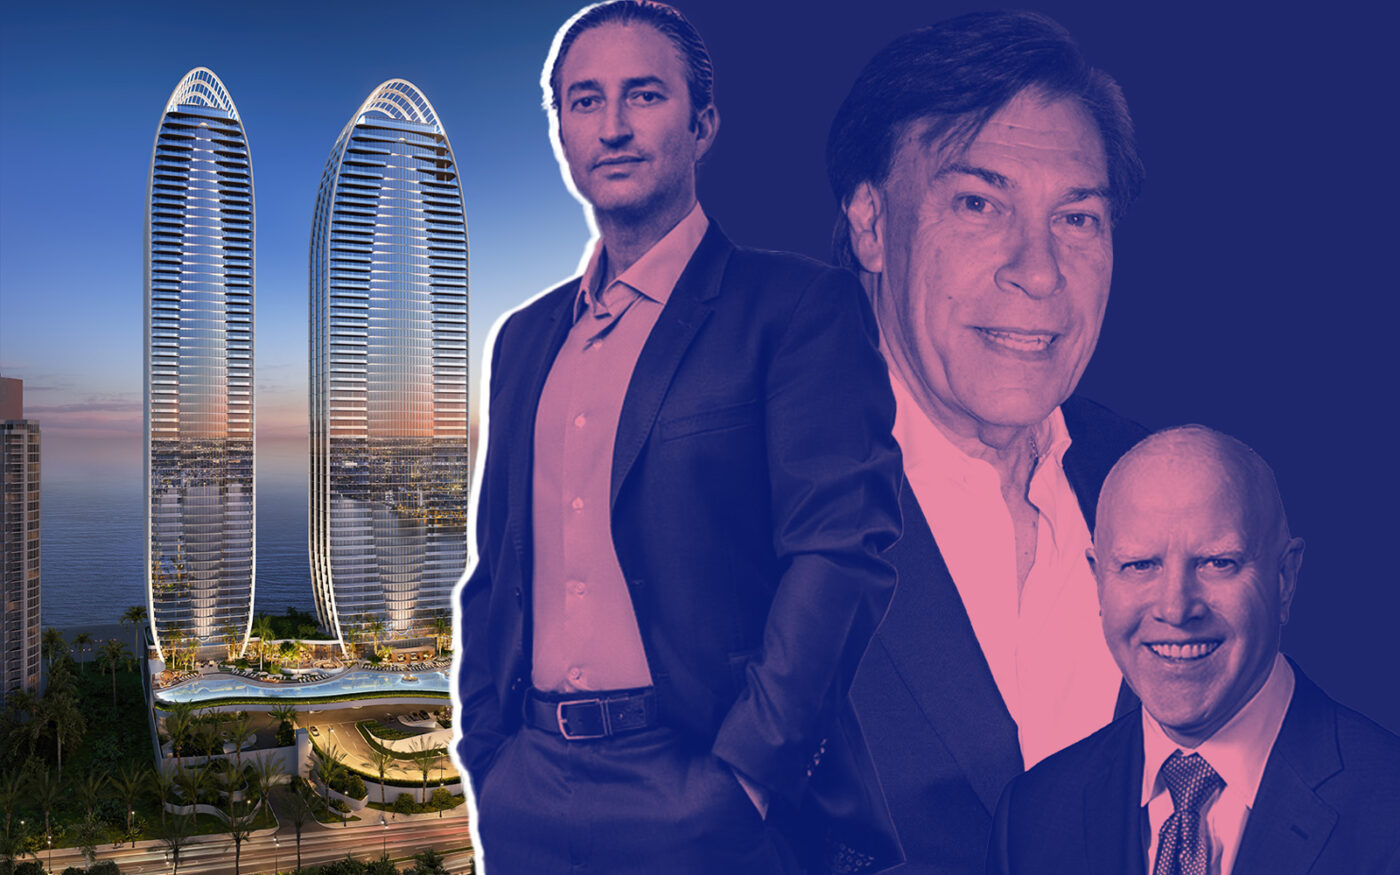 Fortune, Chateau Score $100M Loan for St. Regis Sunny Isles